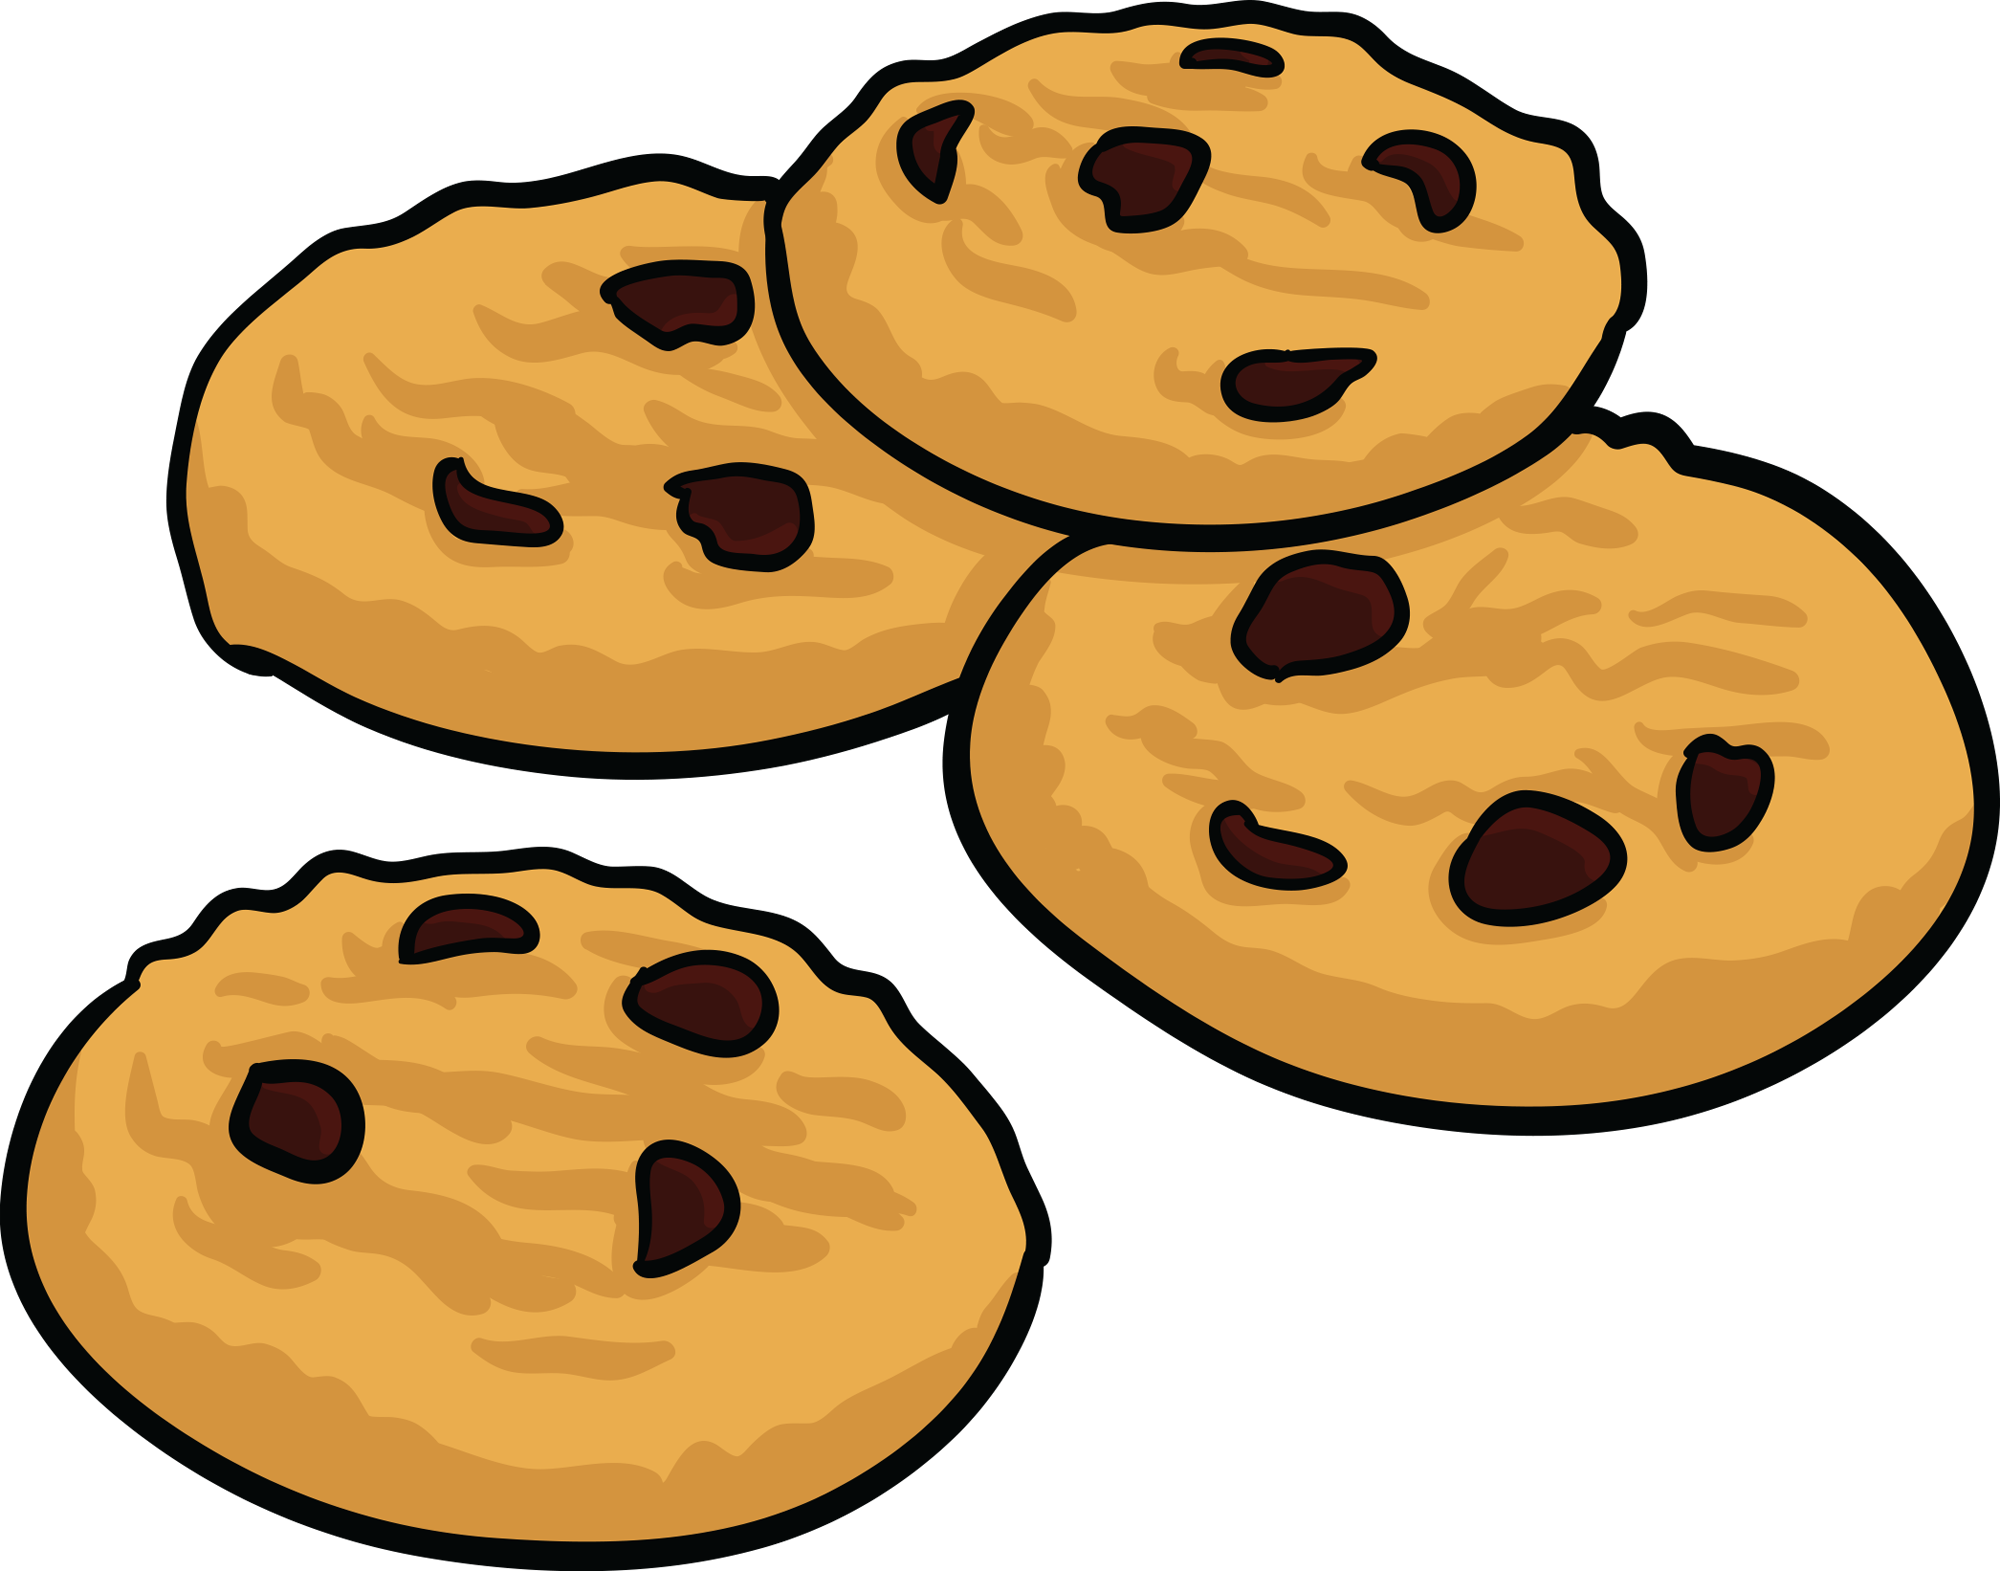 Fundraising clipart cookie dough fundraiser.  collection of free